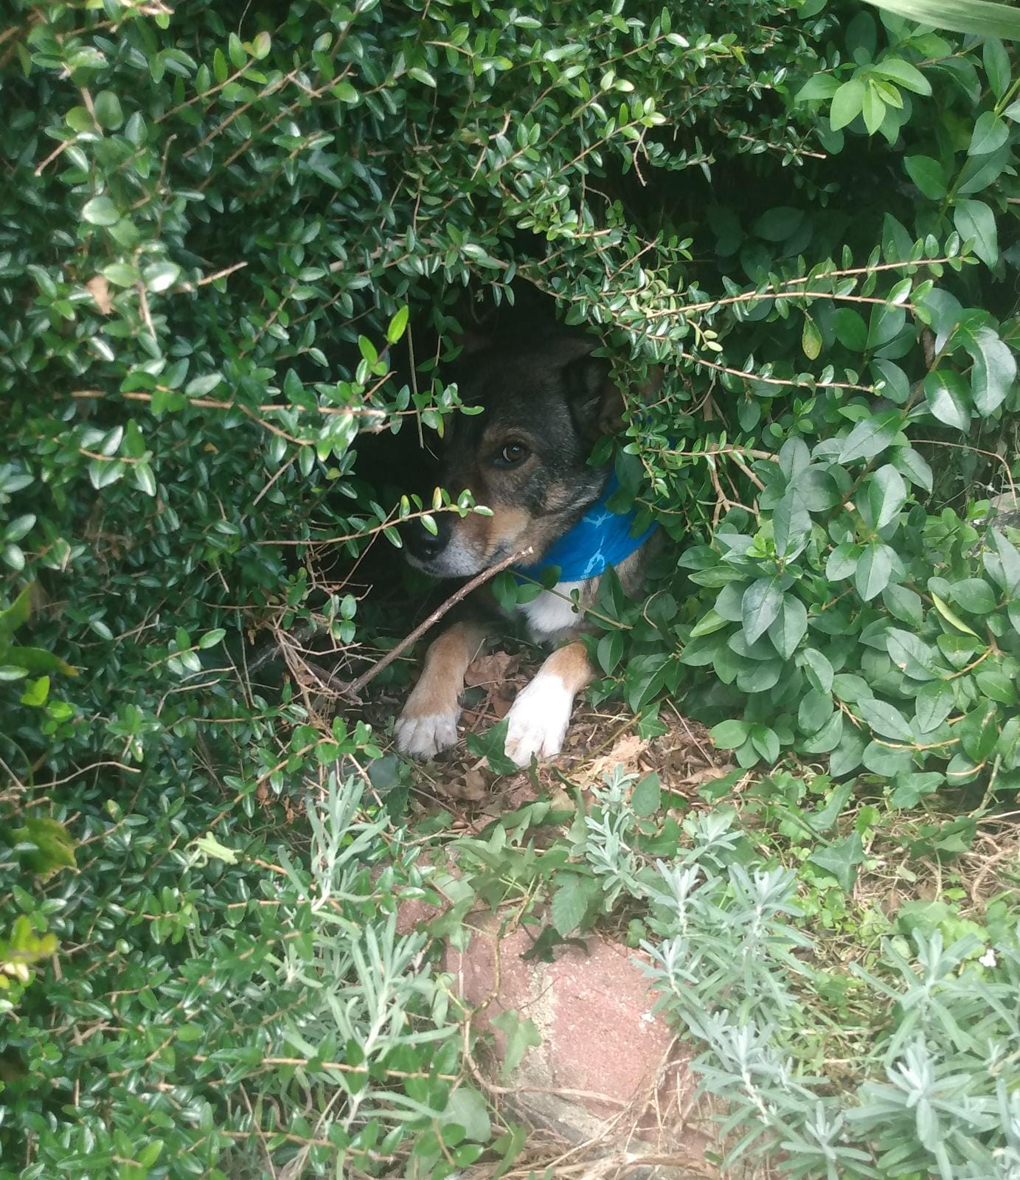 Pauly's face and front paws are poking out of his den in the shrubbery